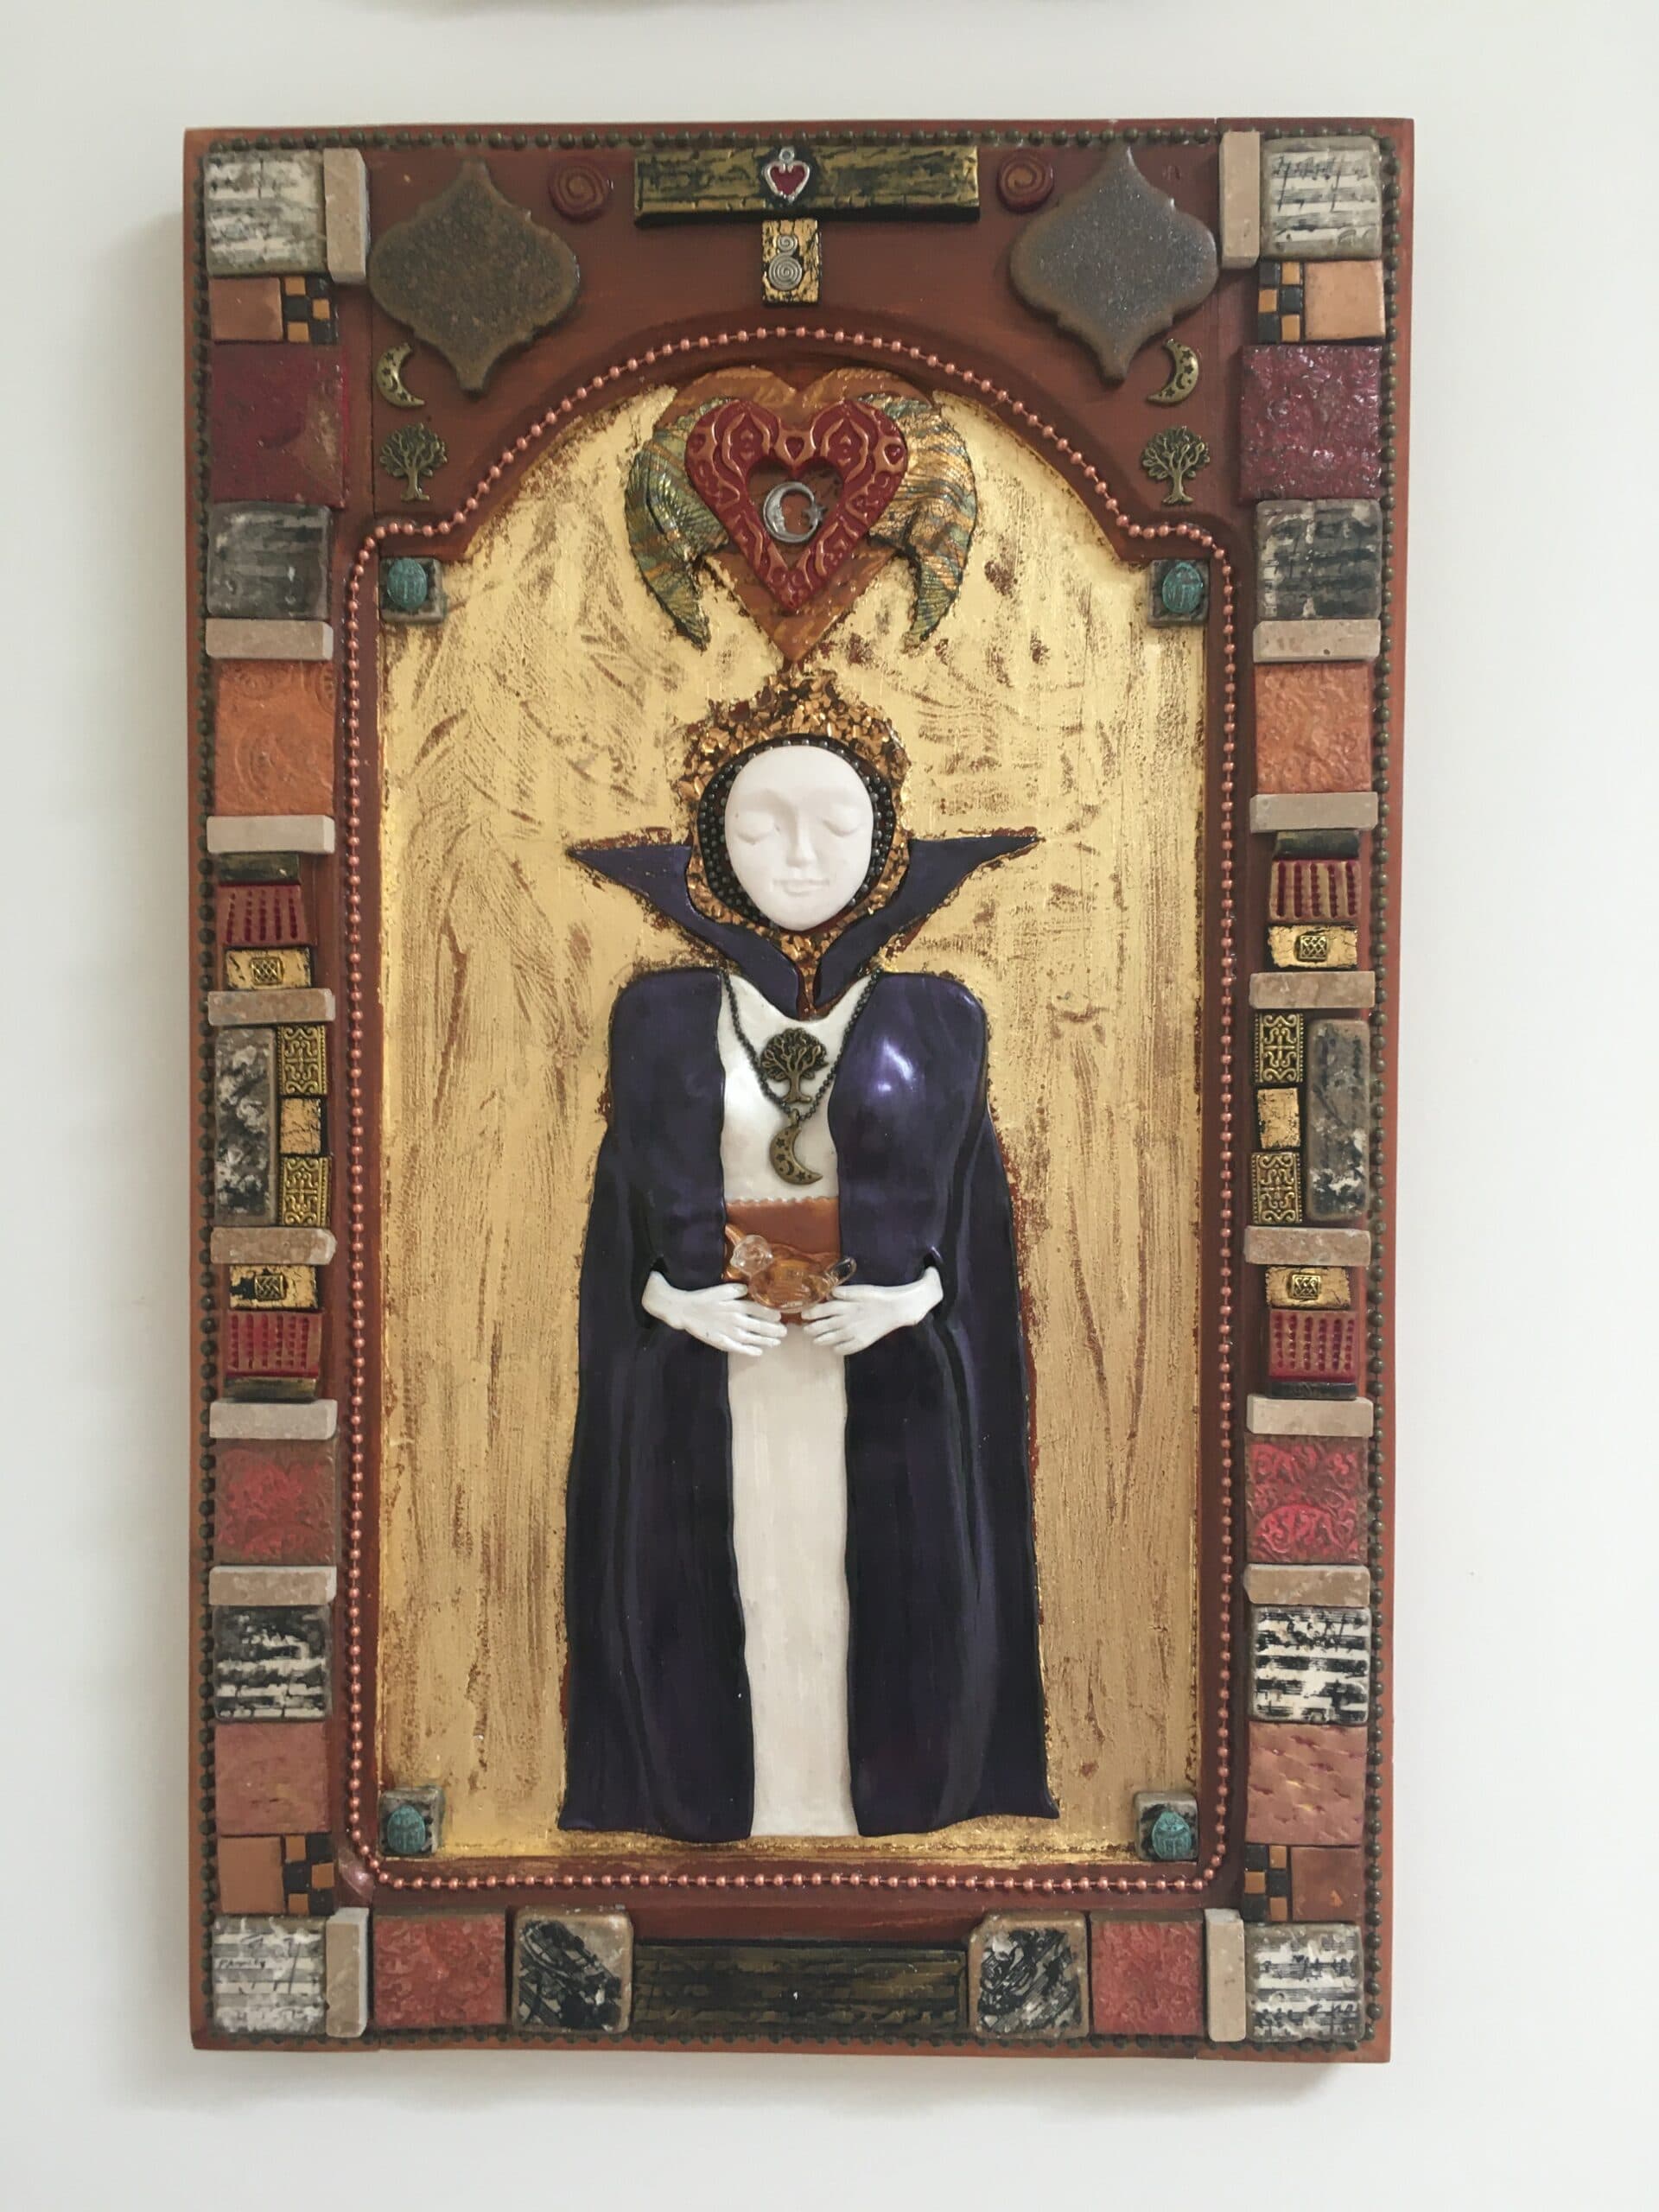 Image of a Priestess figure made of polymer clay in bas relief on wood, with a gold leaf background and mixed media frame.